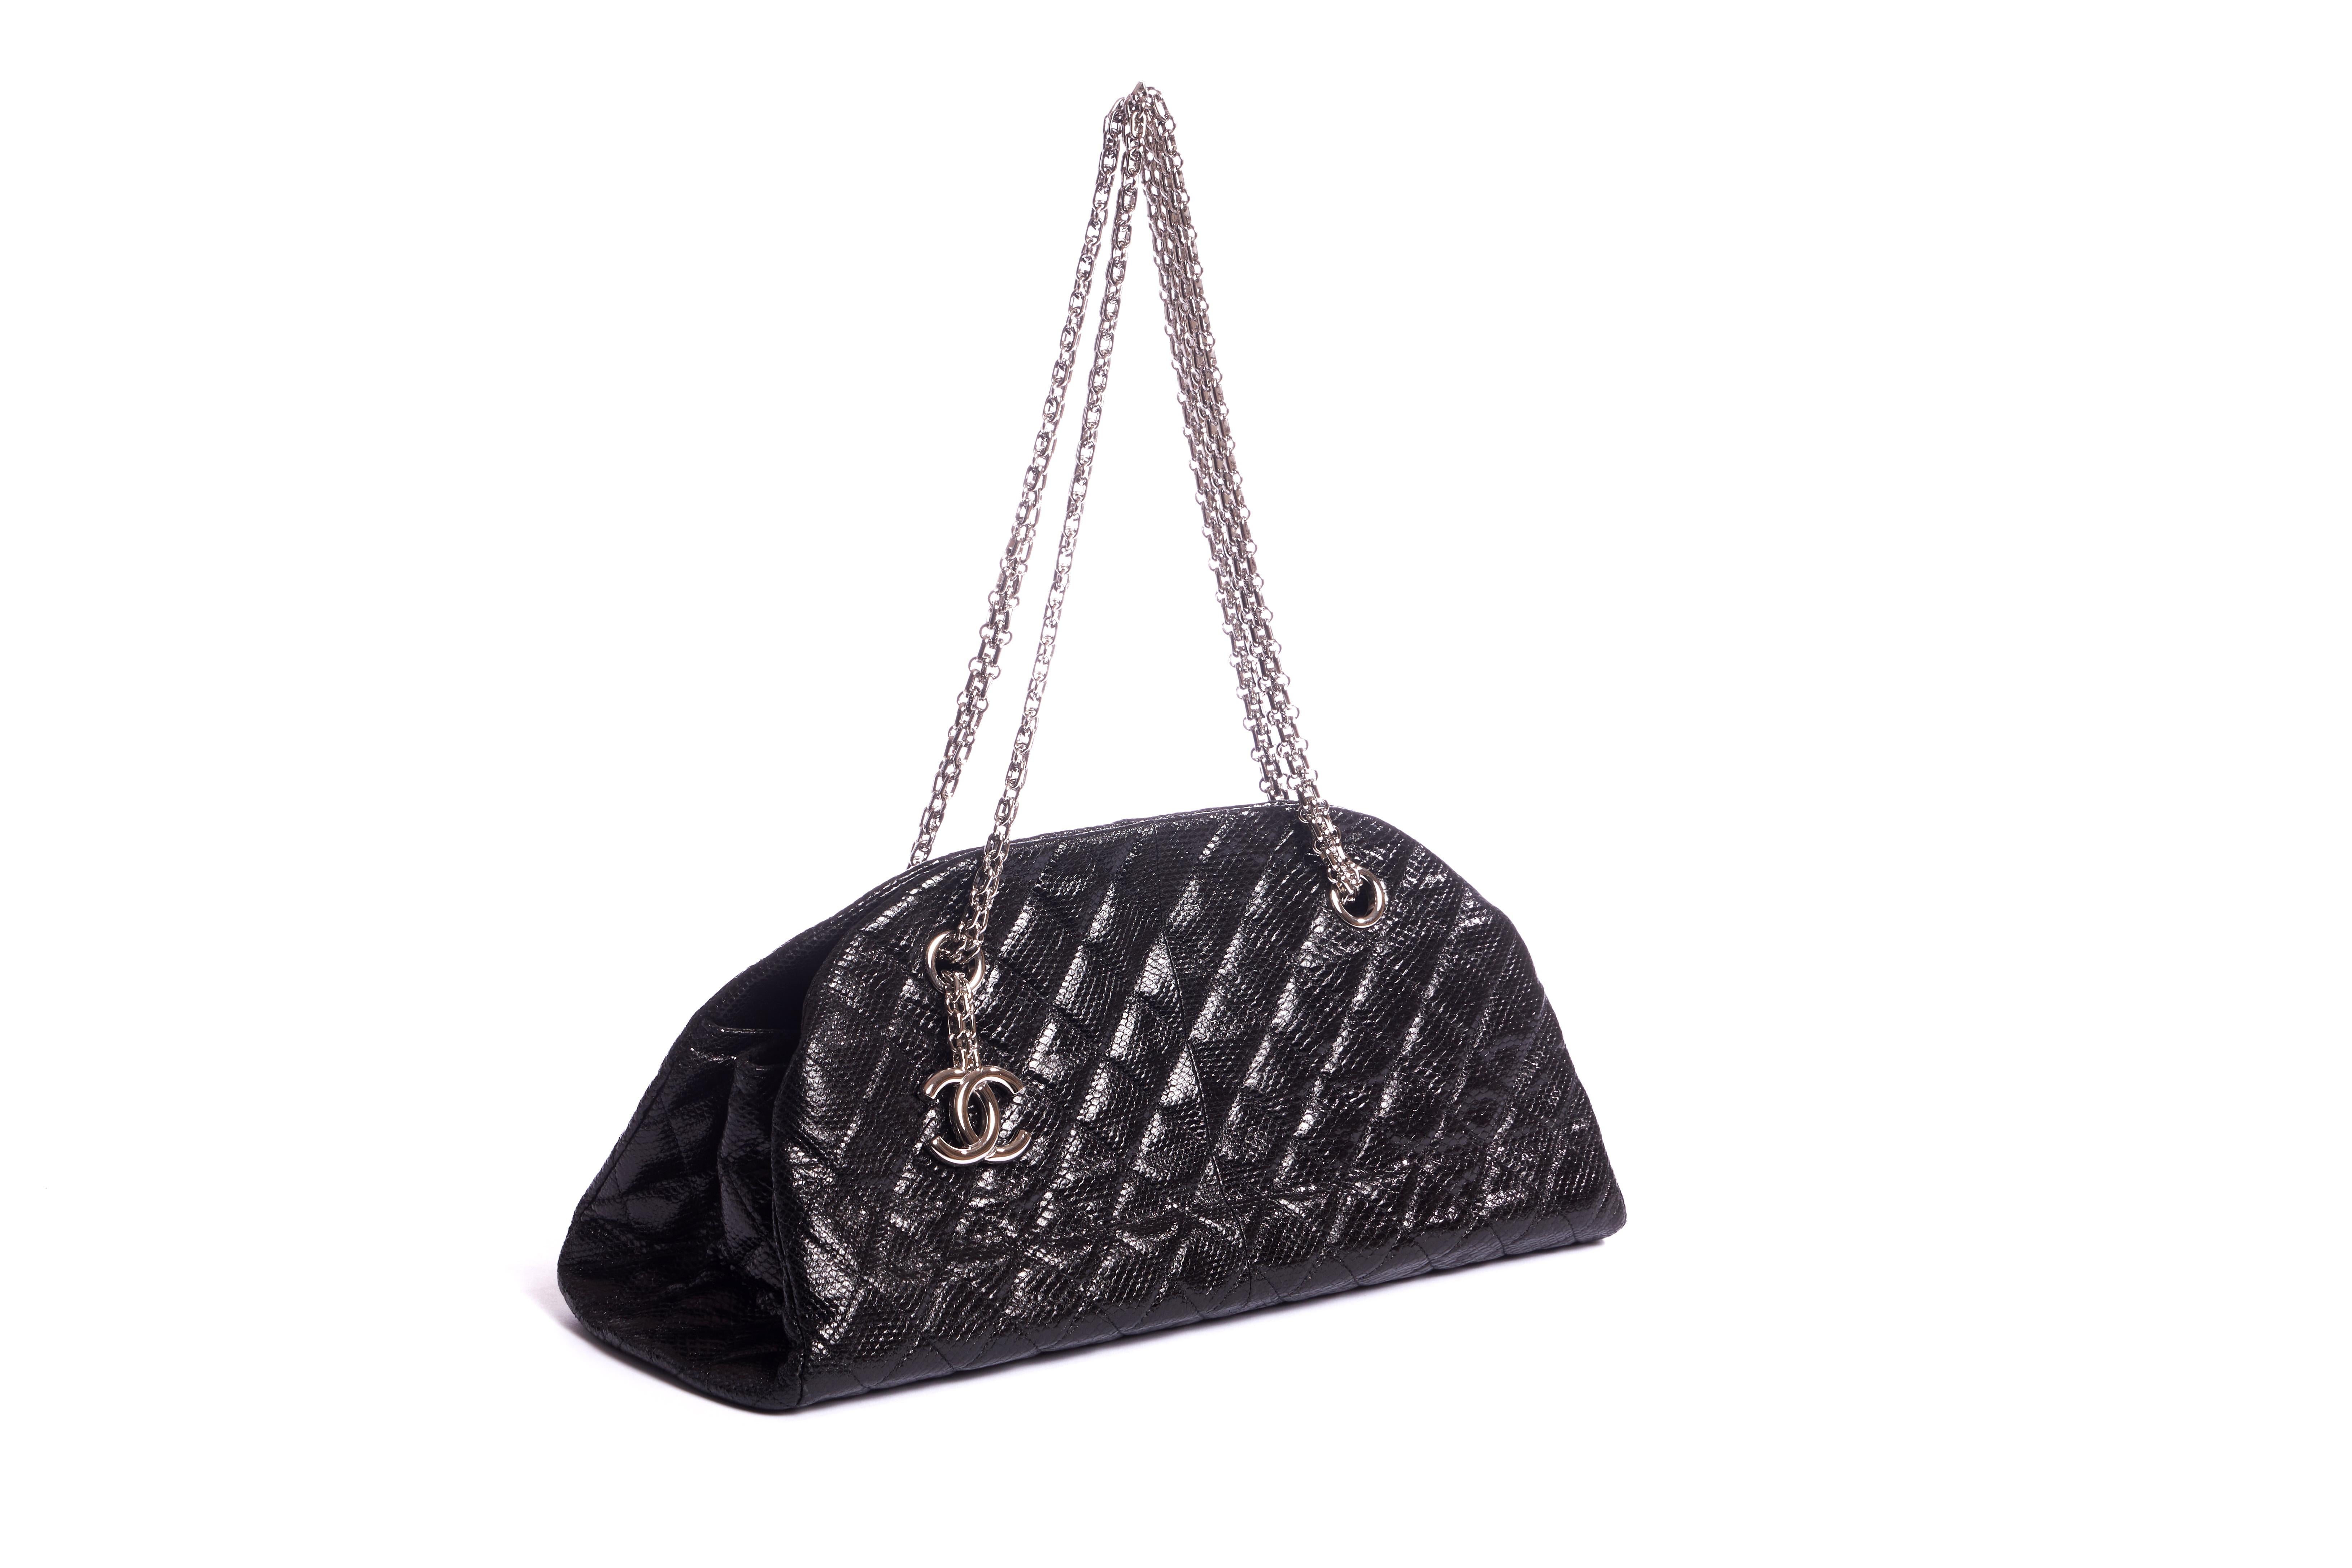 Chanel Rare Black Lizard Shoulder Bag In Excellent Condition For Sale In West Hollywood, CA